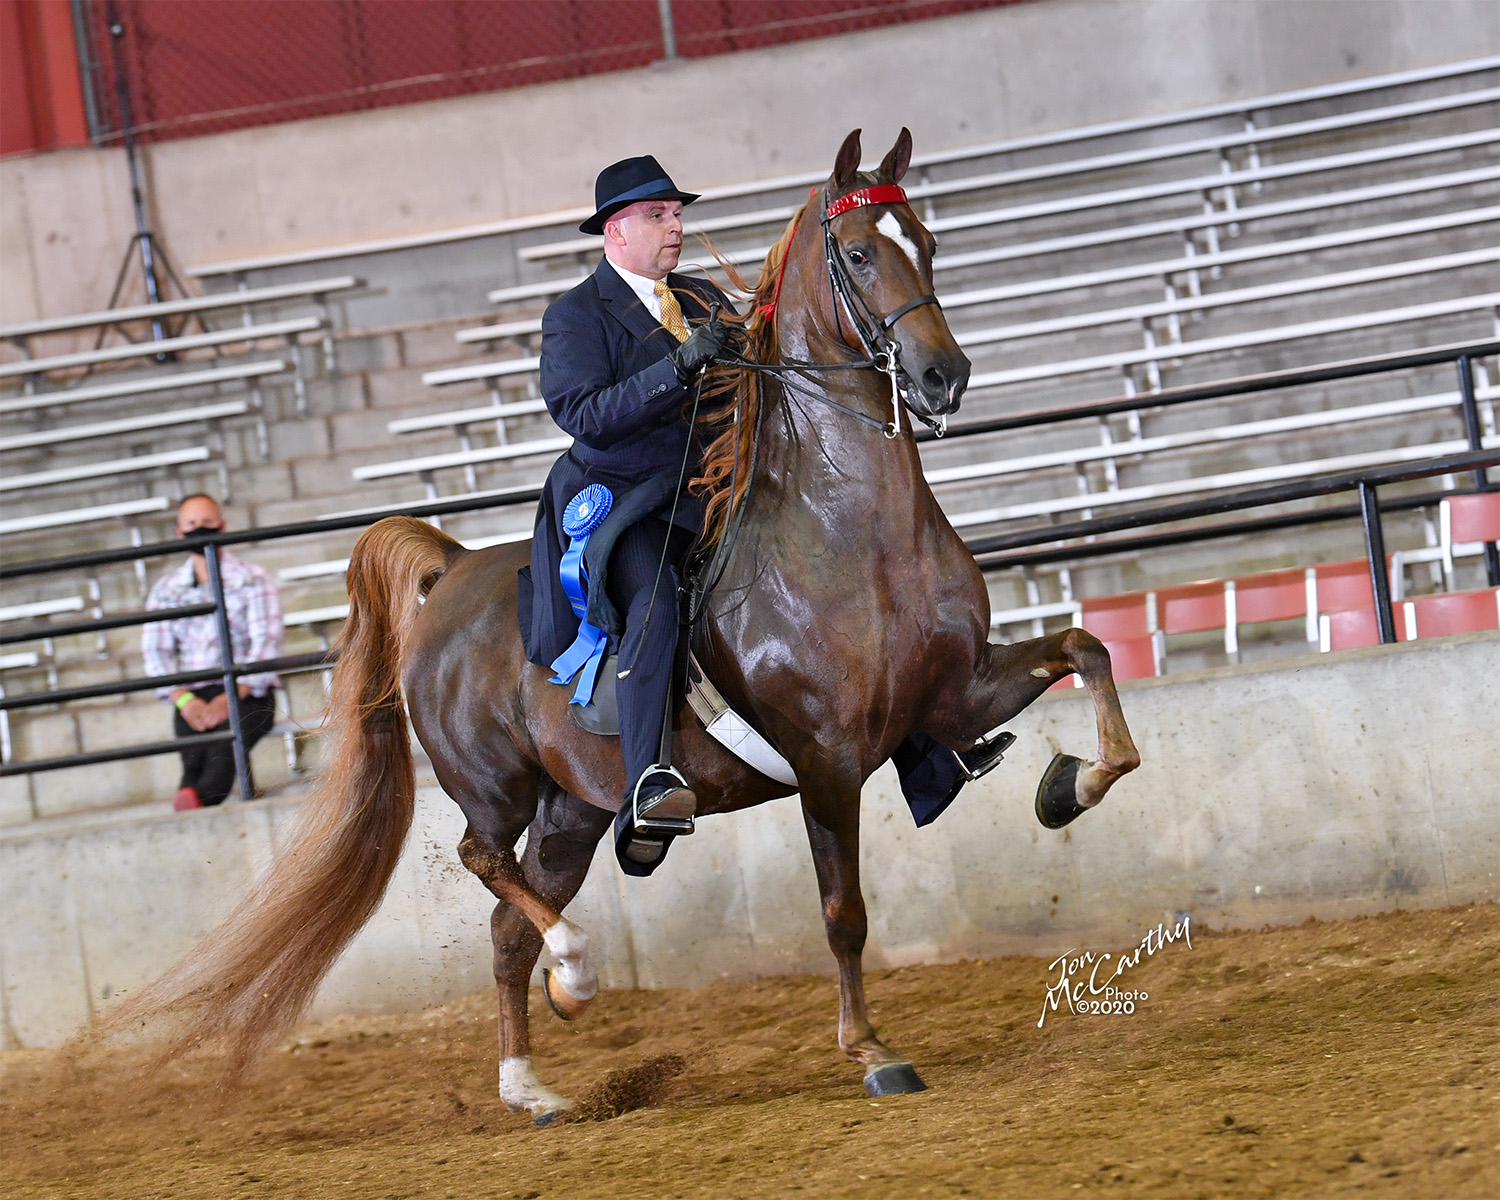 2020 Wisconsin Futurity Horse Show Proofs 2020 Horse Shows